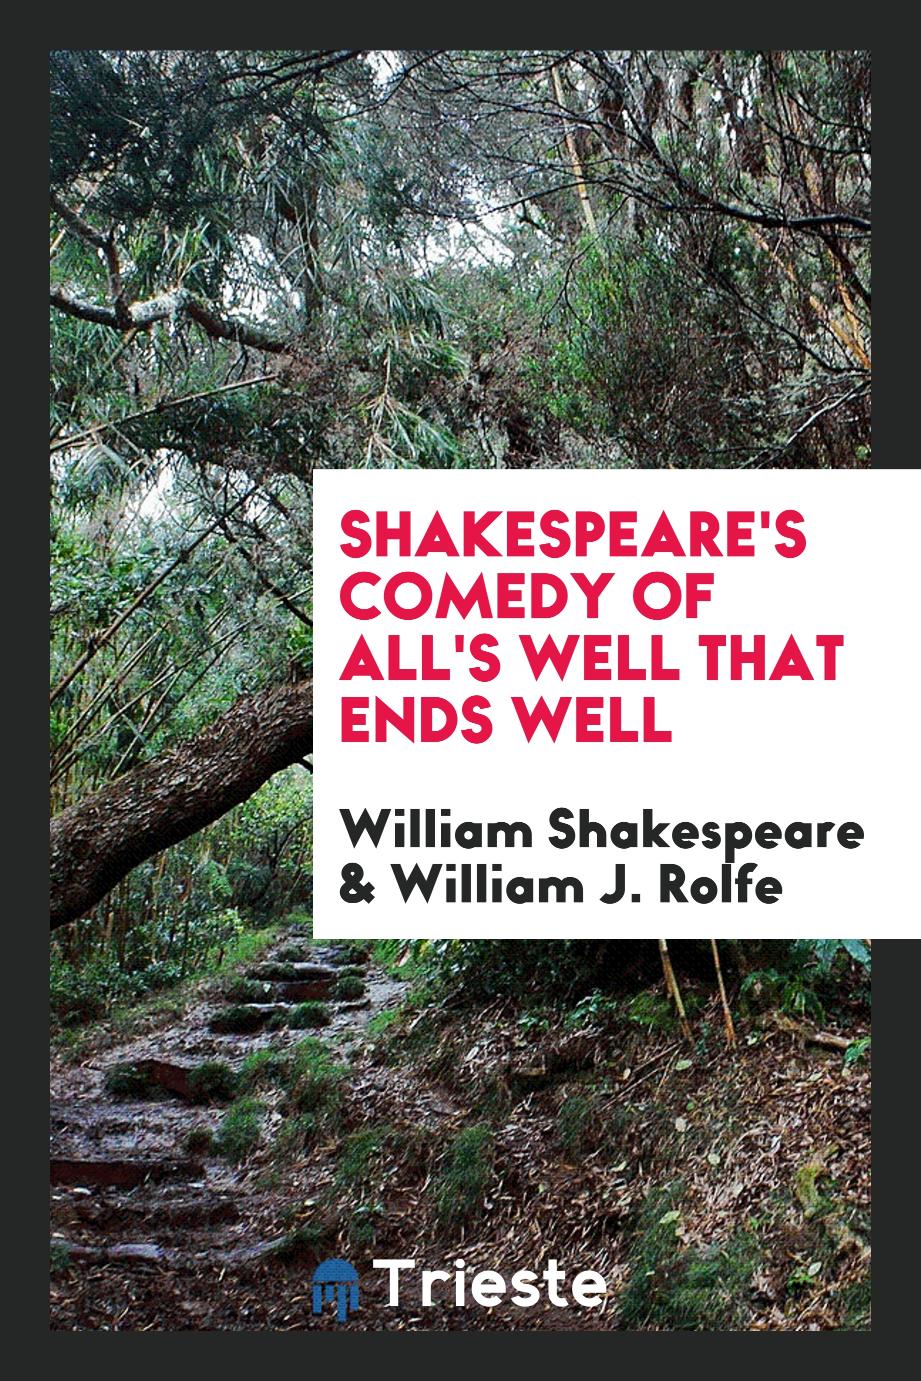 Shakespeare's Comedy of All's Well that Ends Well